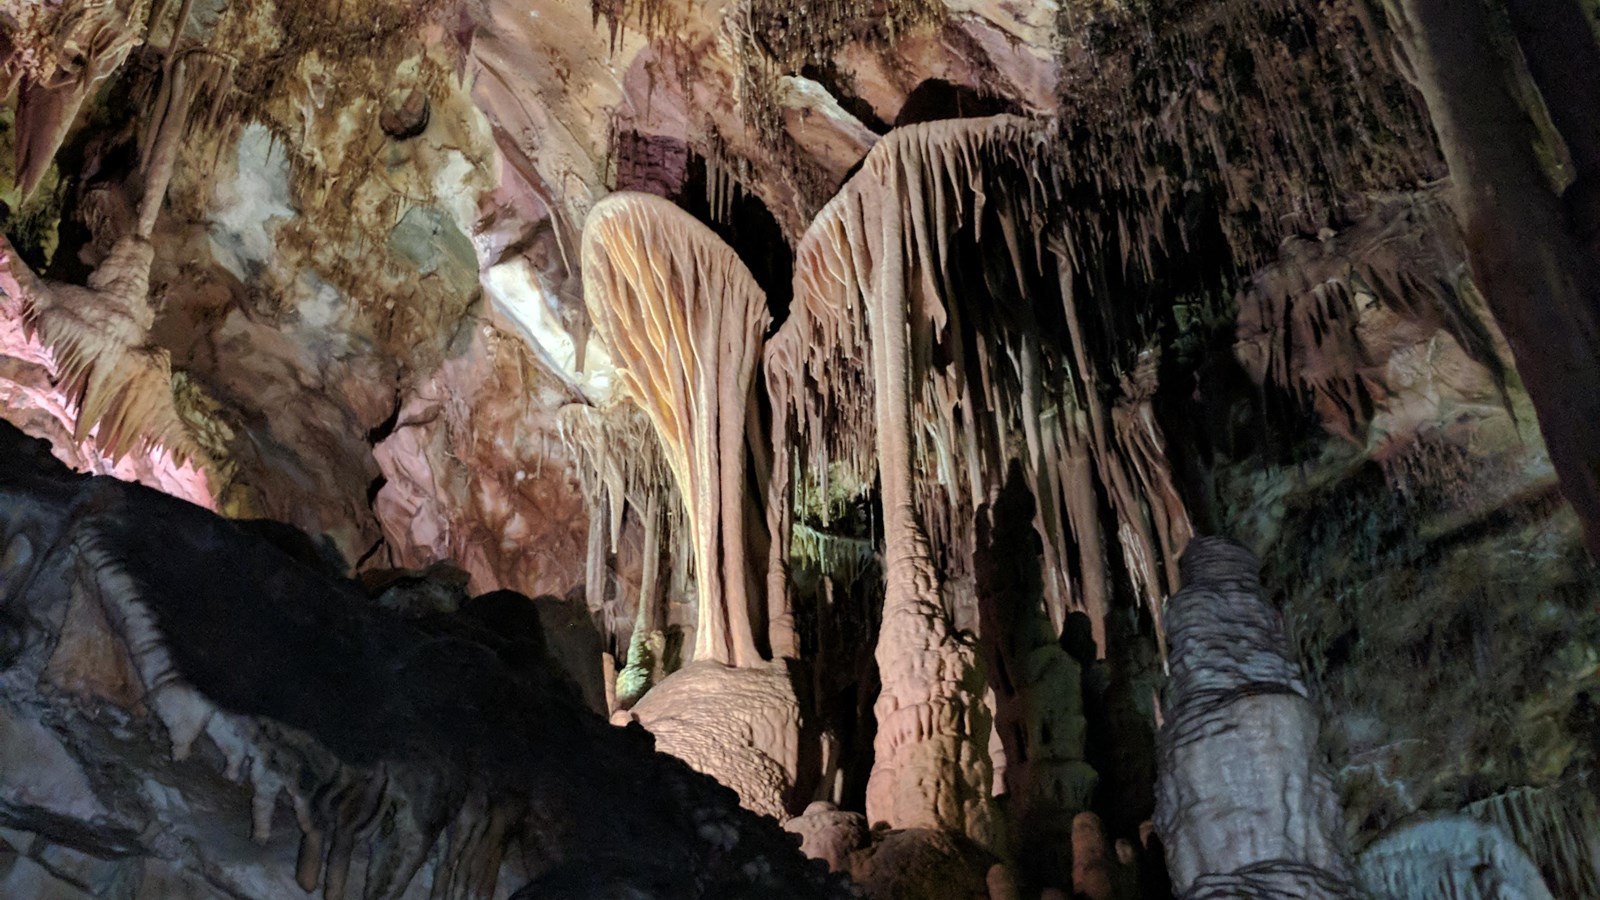 Tan cave formations in the Grand Palace of Lehman Caves